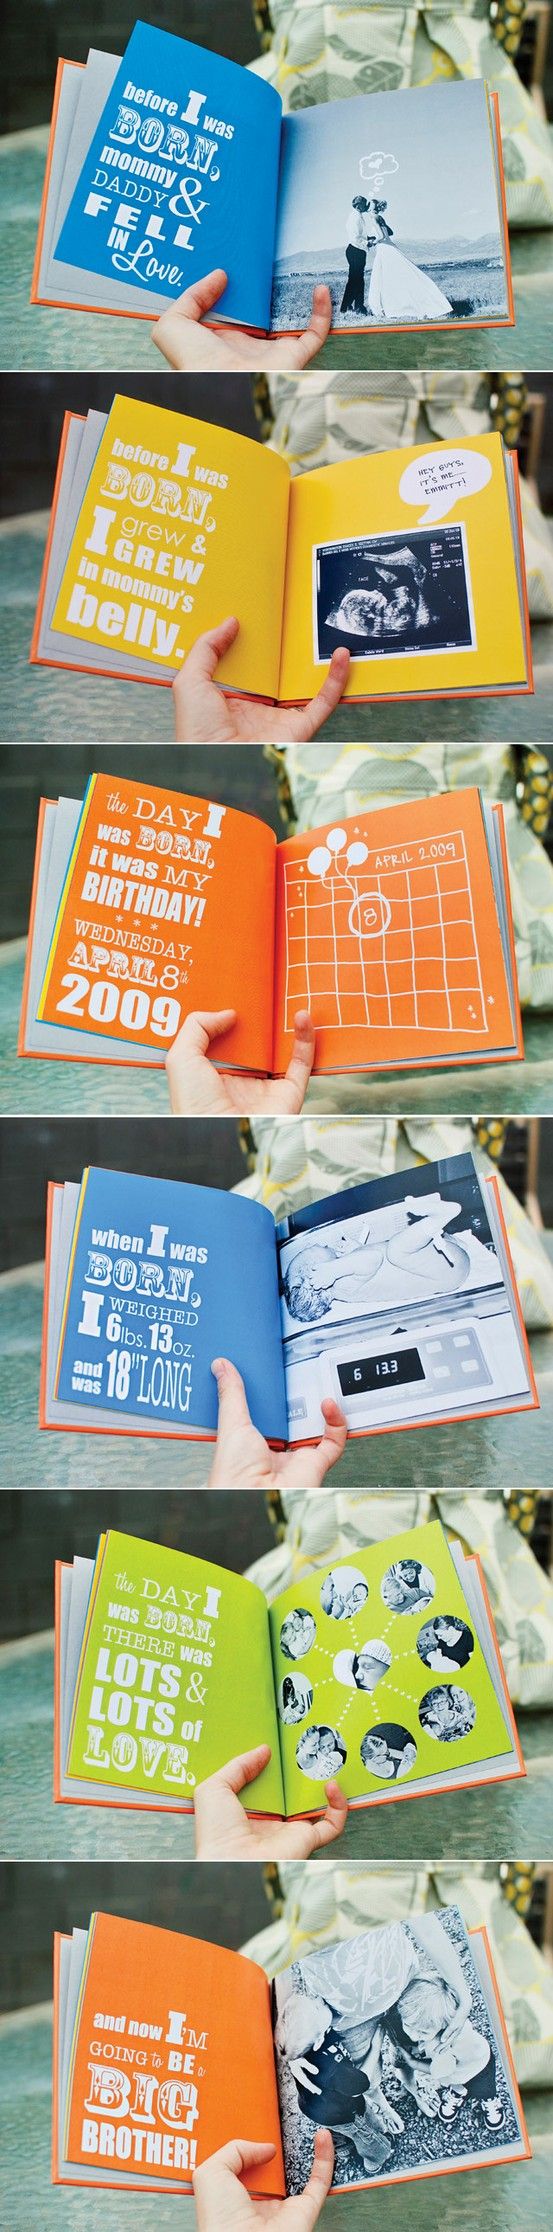 Adorable!!  7 Baby Photo Book Ideas My boys loved the “when they were born stories”. Making it into an actual book….love it